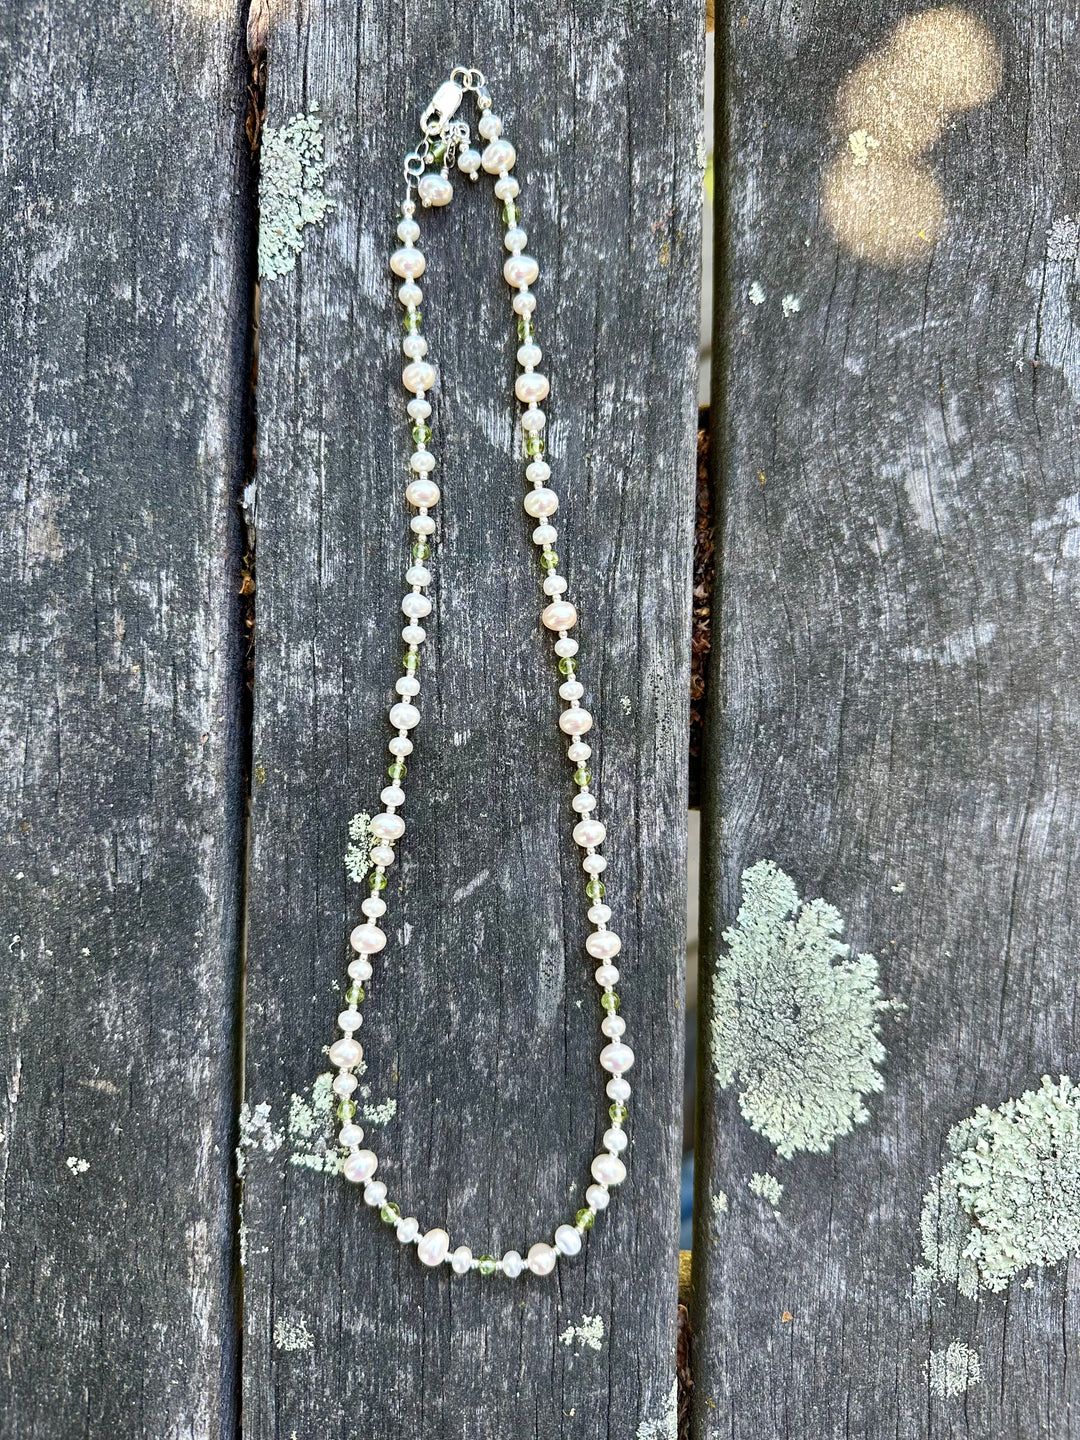 Peridot and freshwater pearl necklace